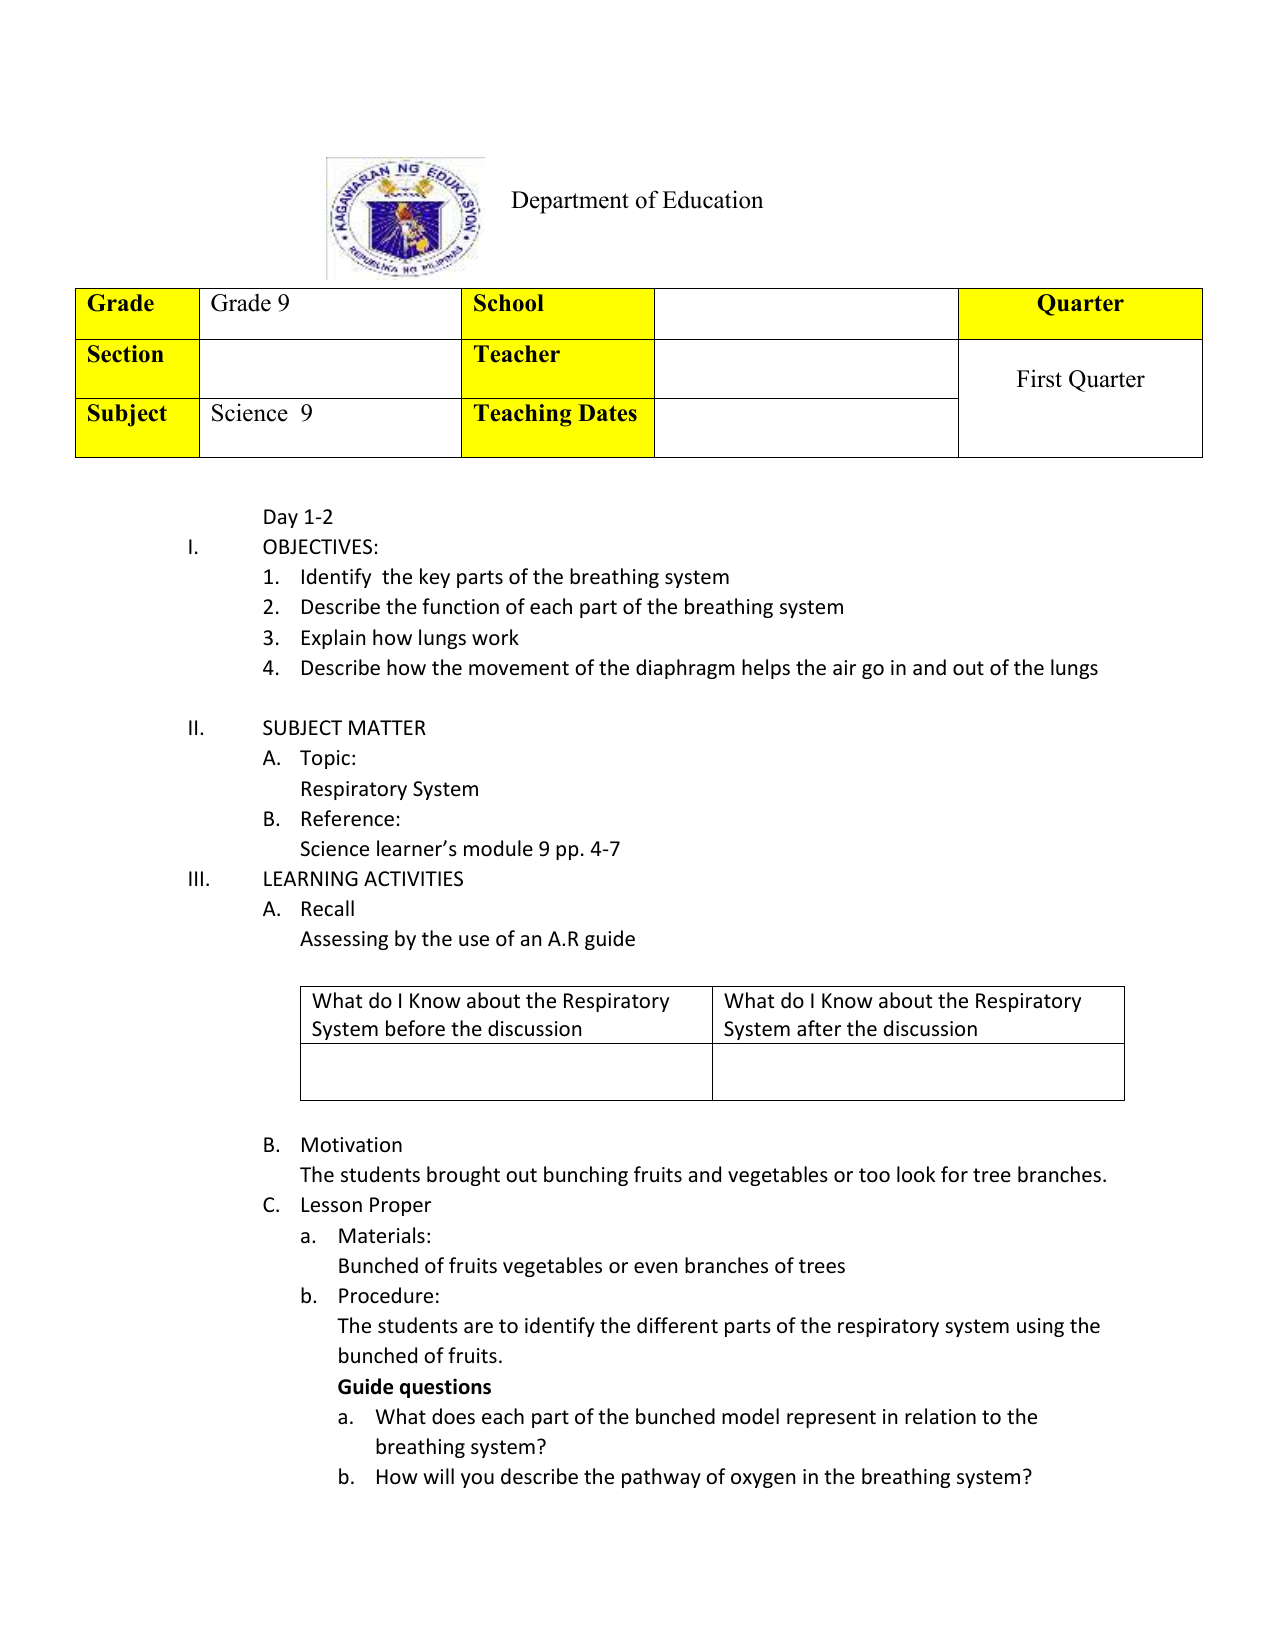 semi detailed lesson plan in science grade 9